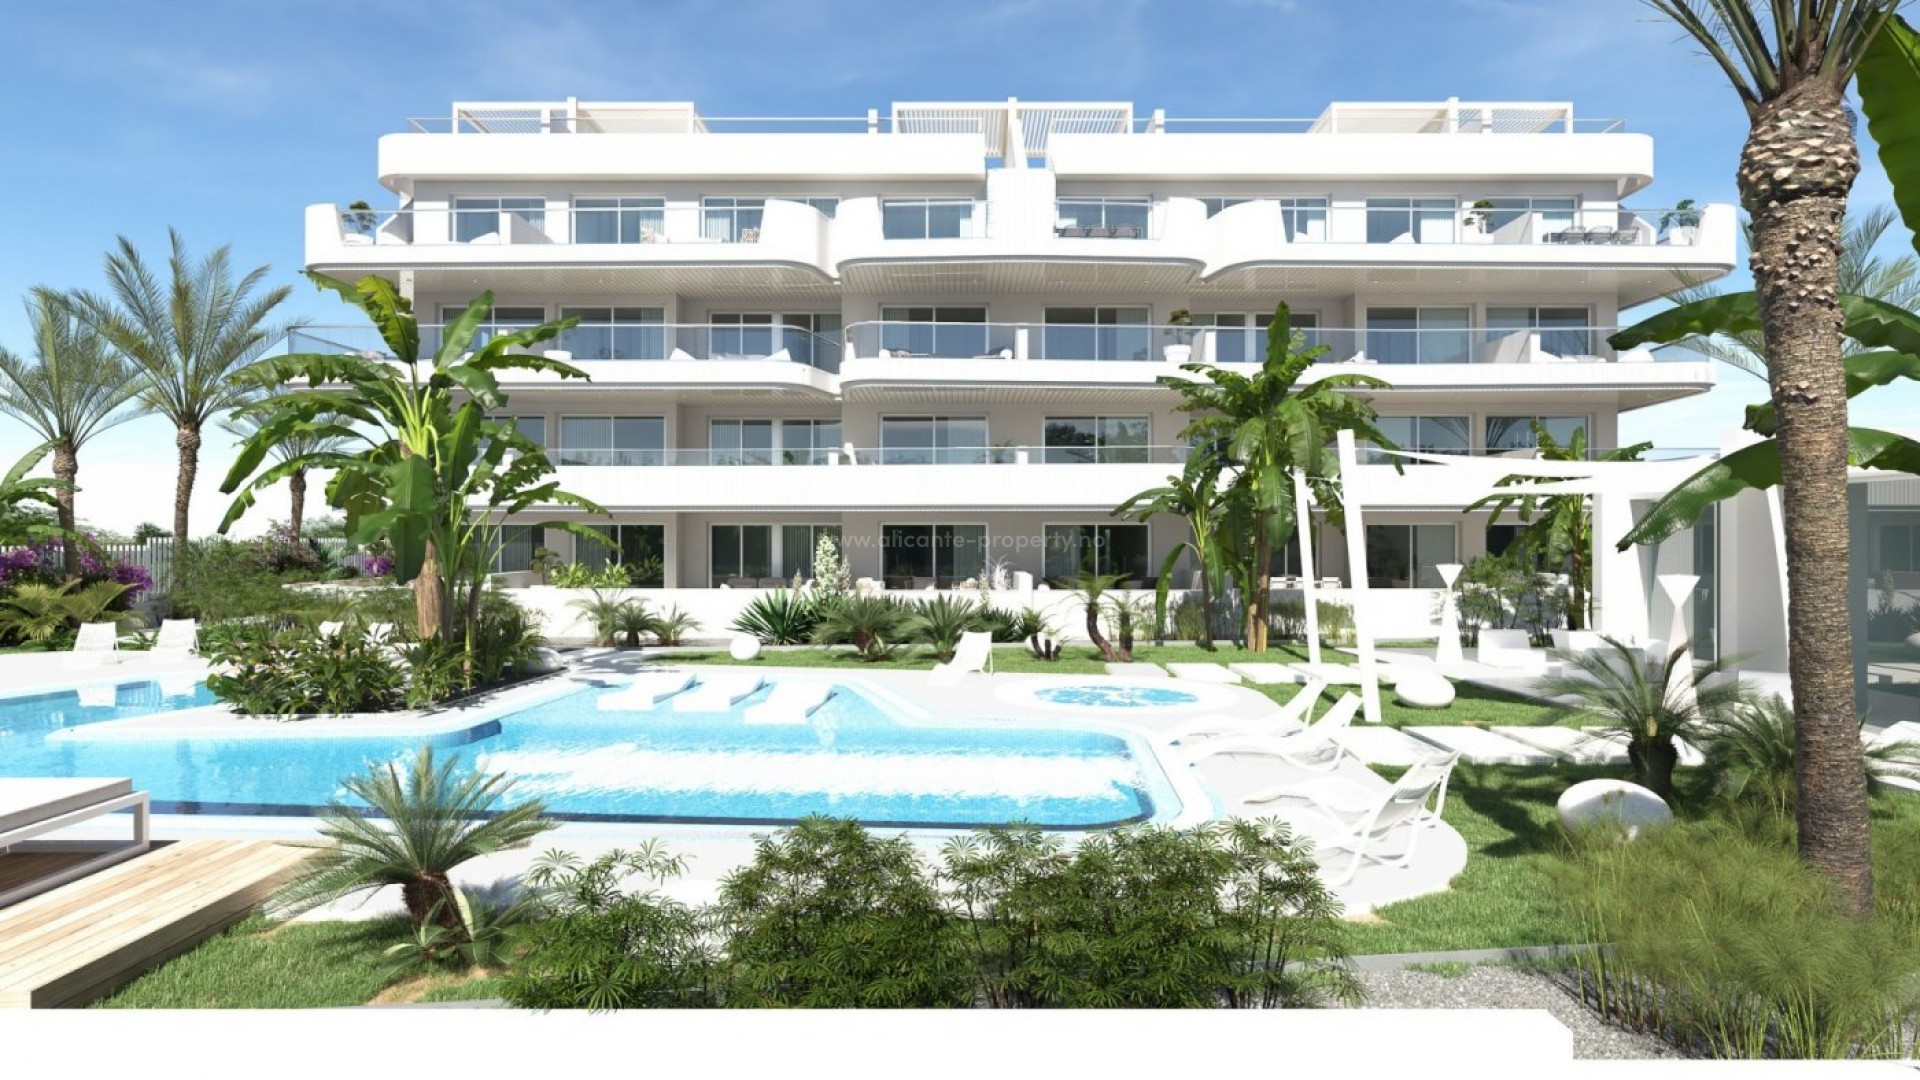 Newly built luxury residential complex in Lomas de Cabo Roig, apartments/penthouses, 2/3 bedrooms, 2 bathrooms, great common areas, large swimming pool